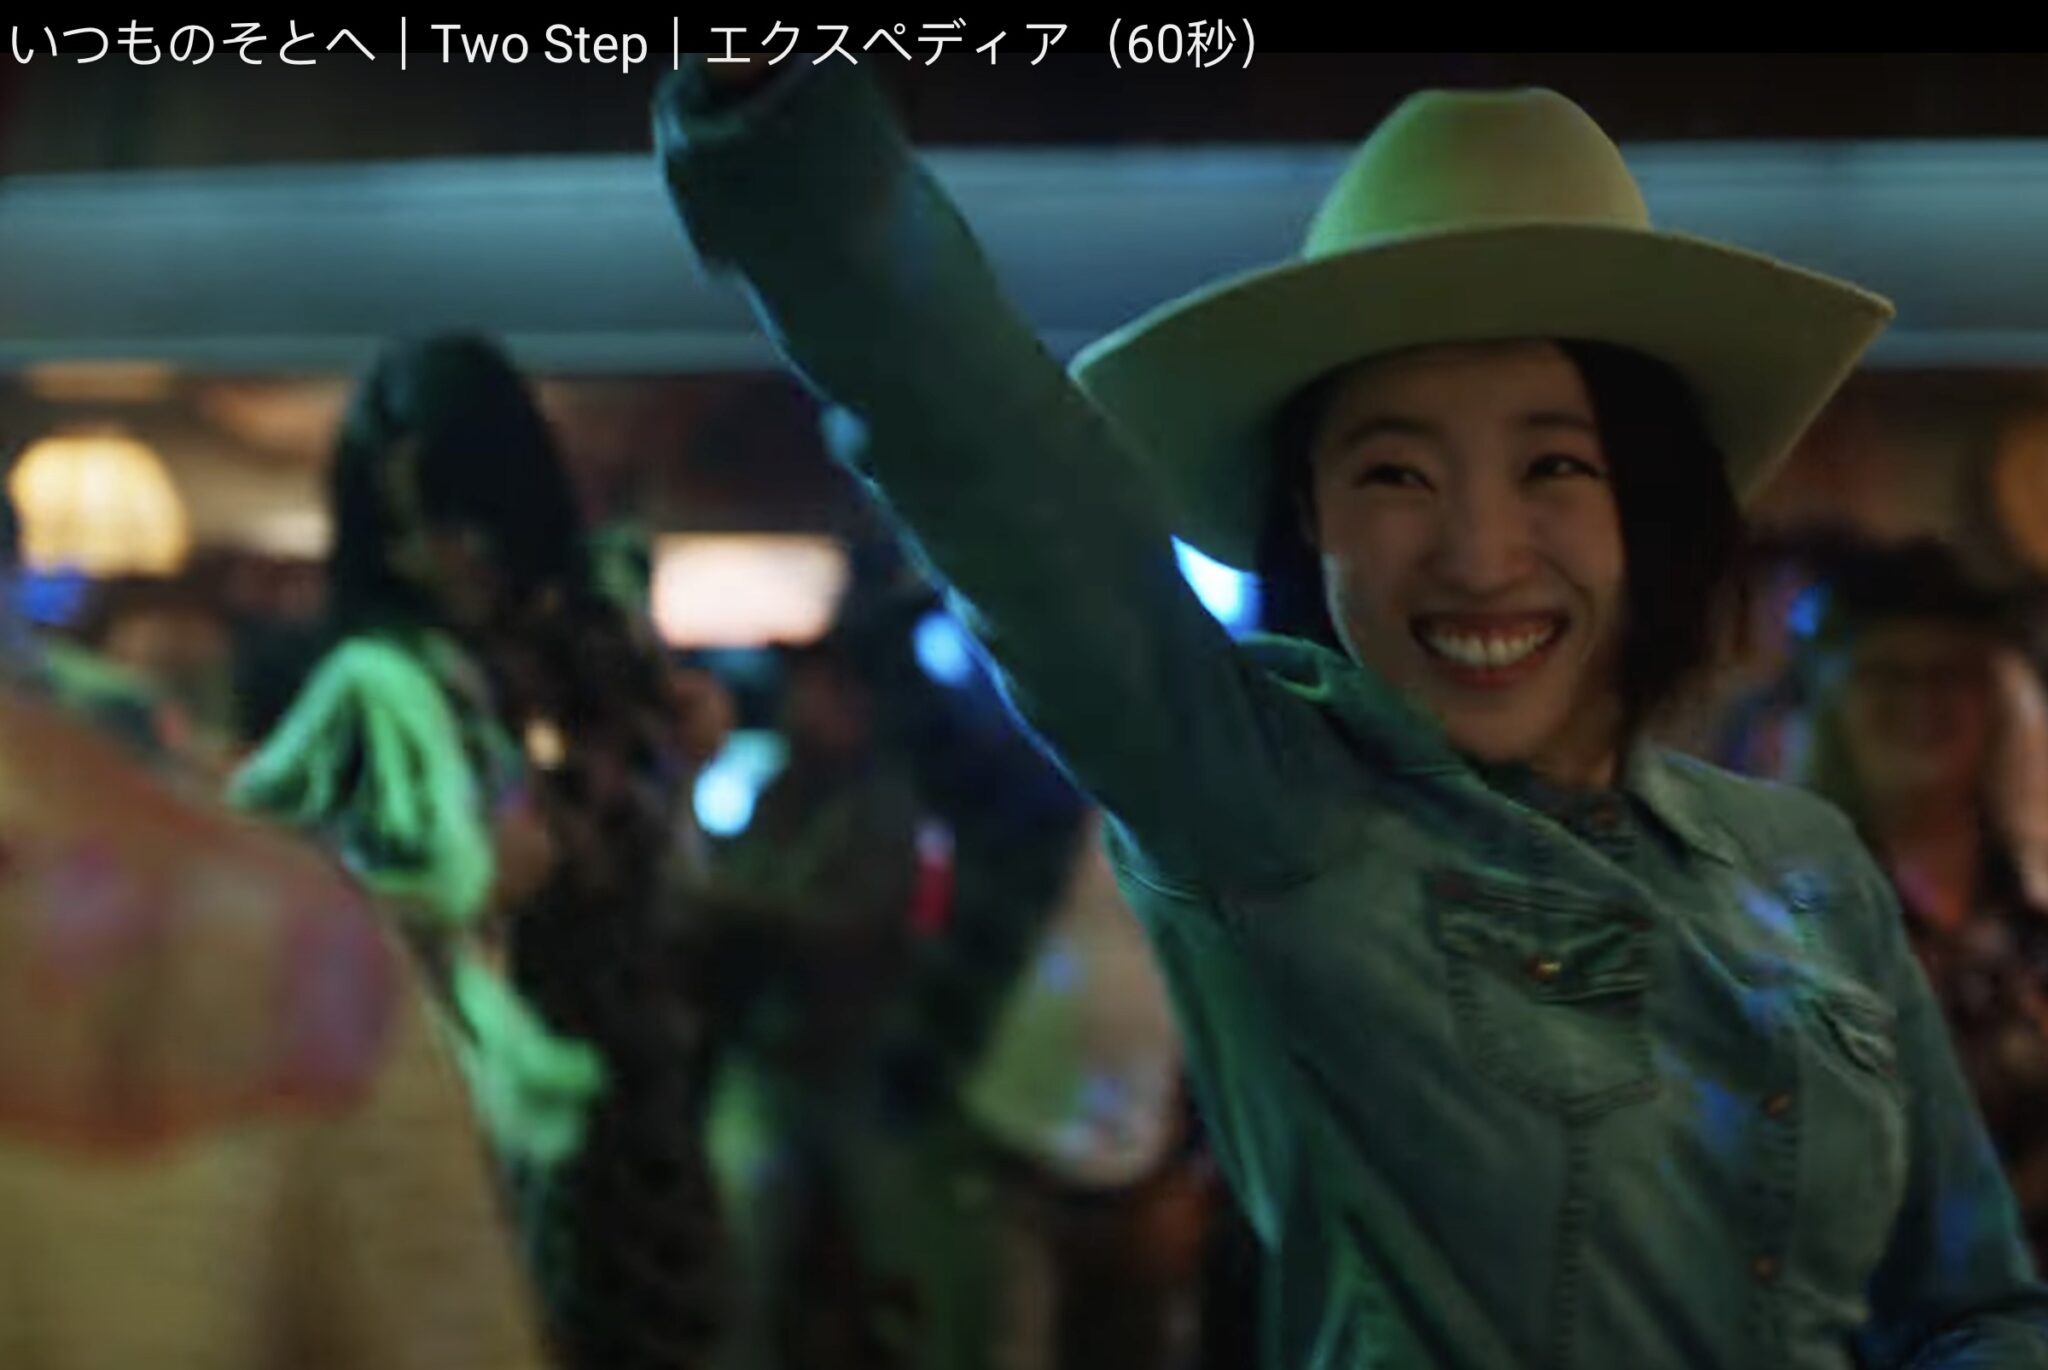 A clip from an Expedia ad that will run on Netflix in Japan. Source: Expedia/YouTube https://www.youtube.com/watch?v=FnLMMhAI5YI&t=1s